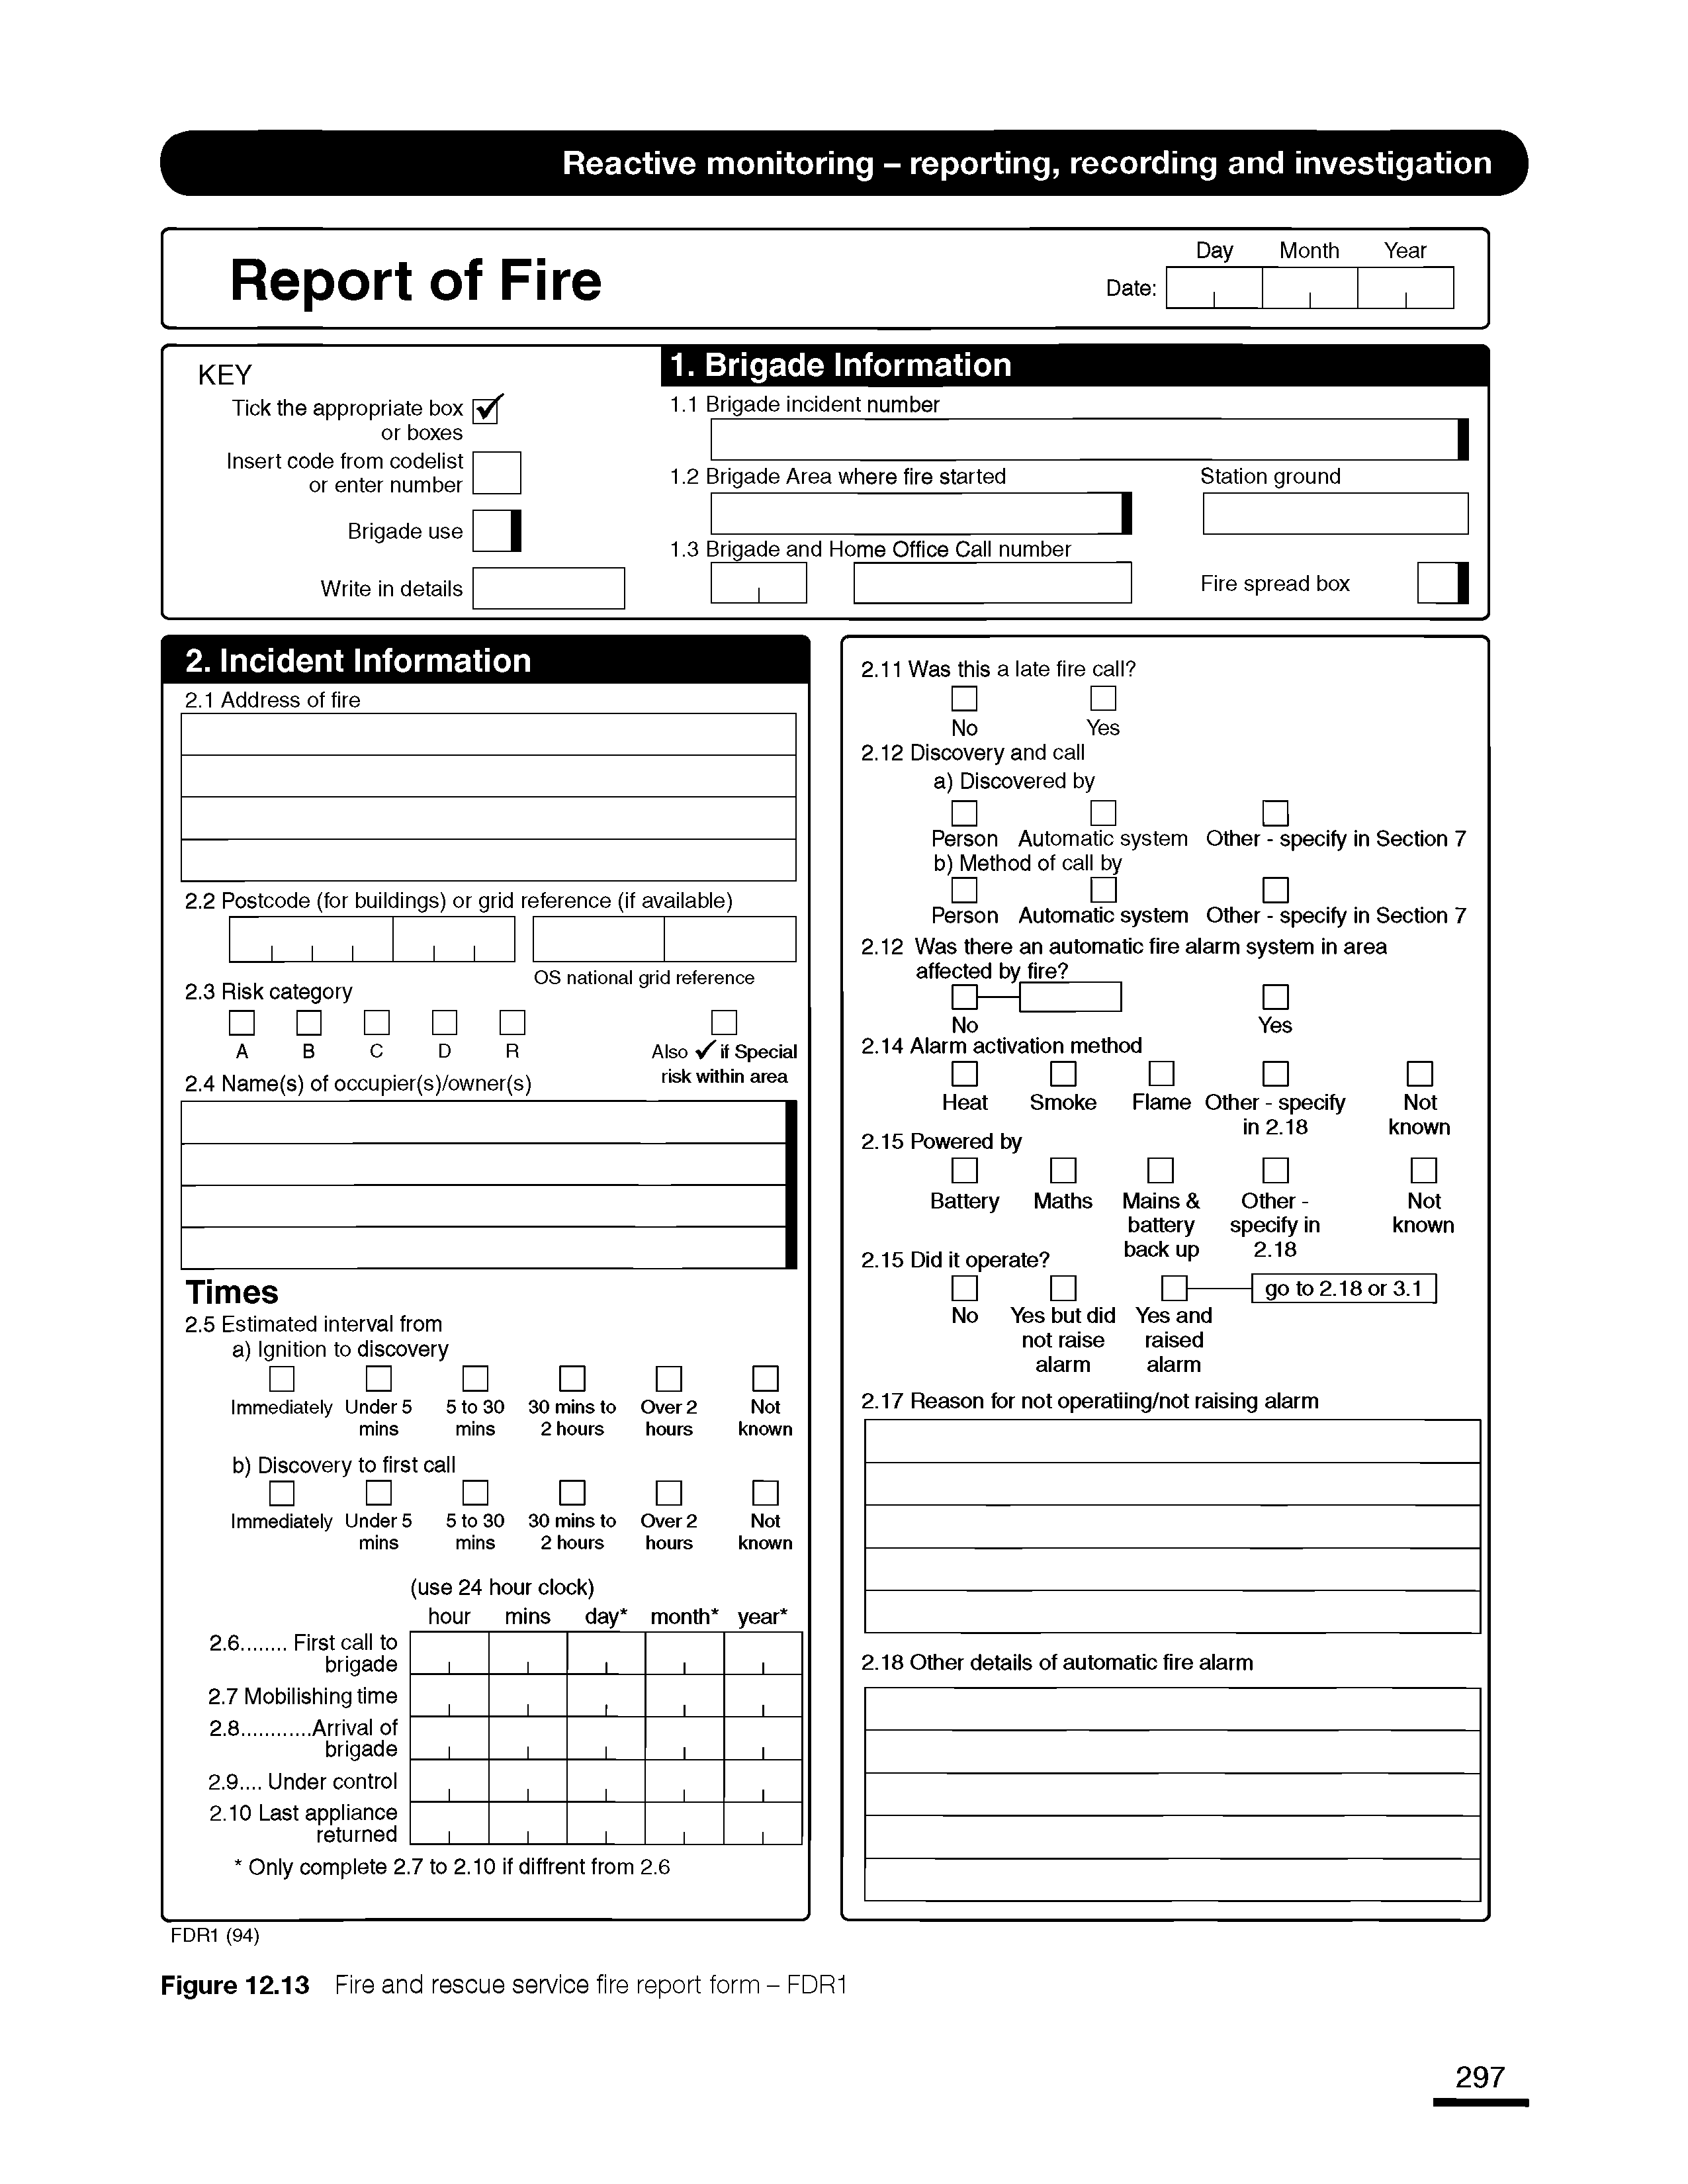 Figure 12.13 Fire and rescue service fire report form - FDR1...